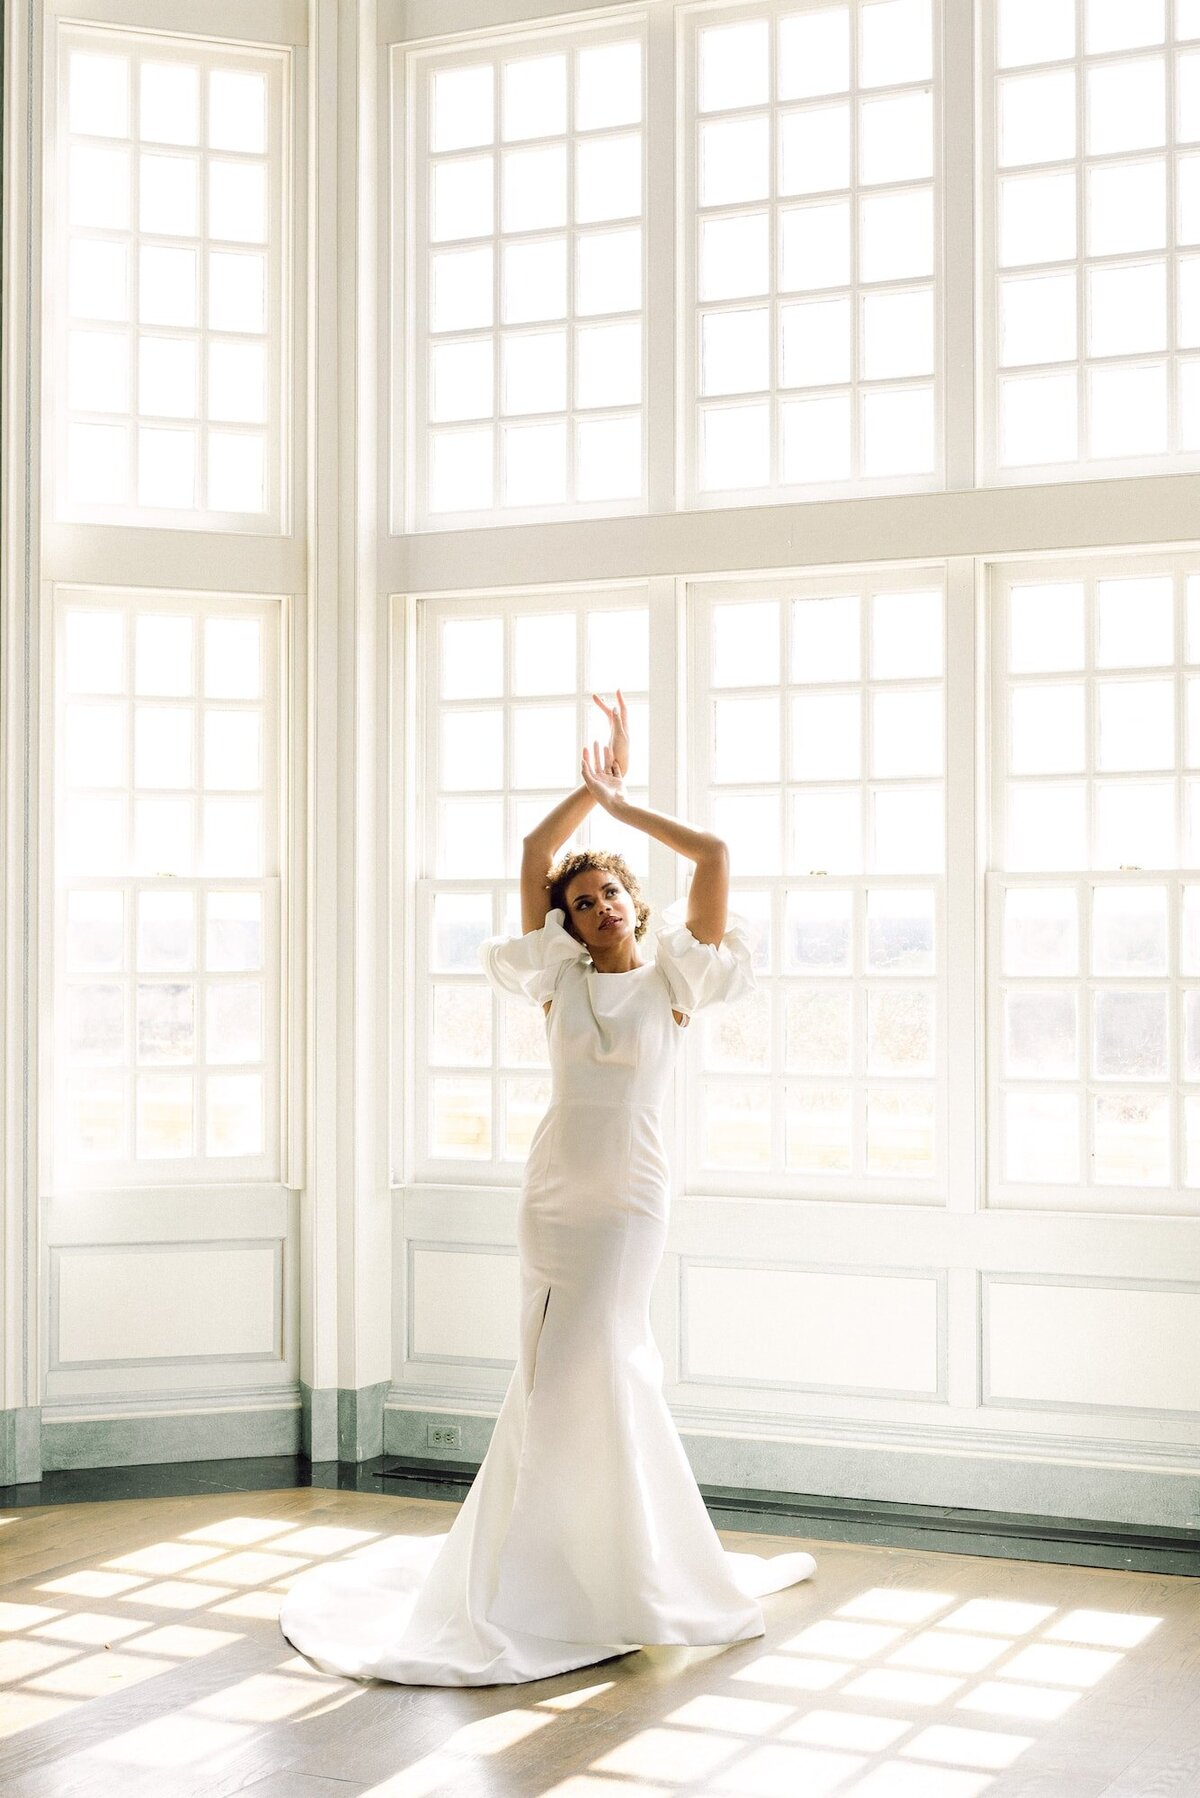 Bride posing with arms up in front of large wall of windows